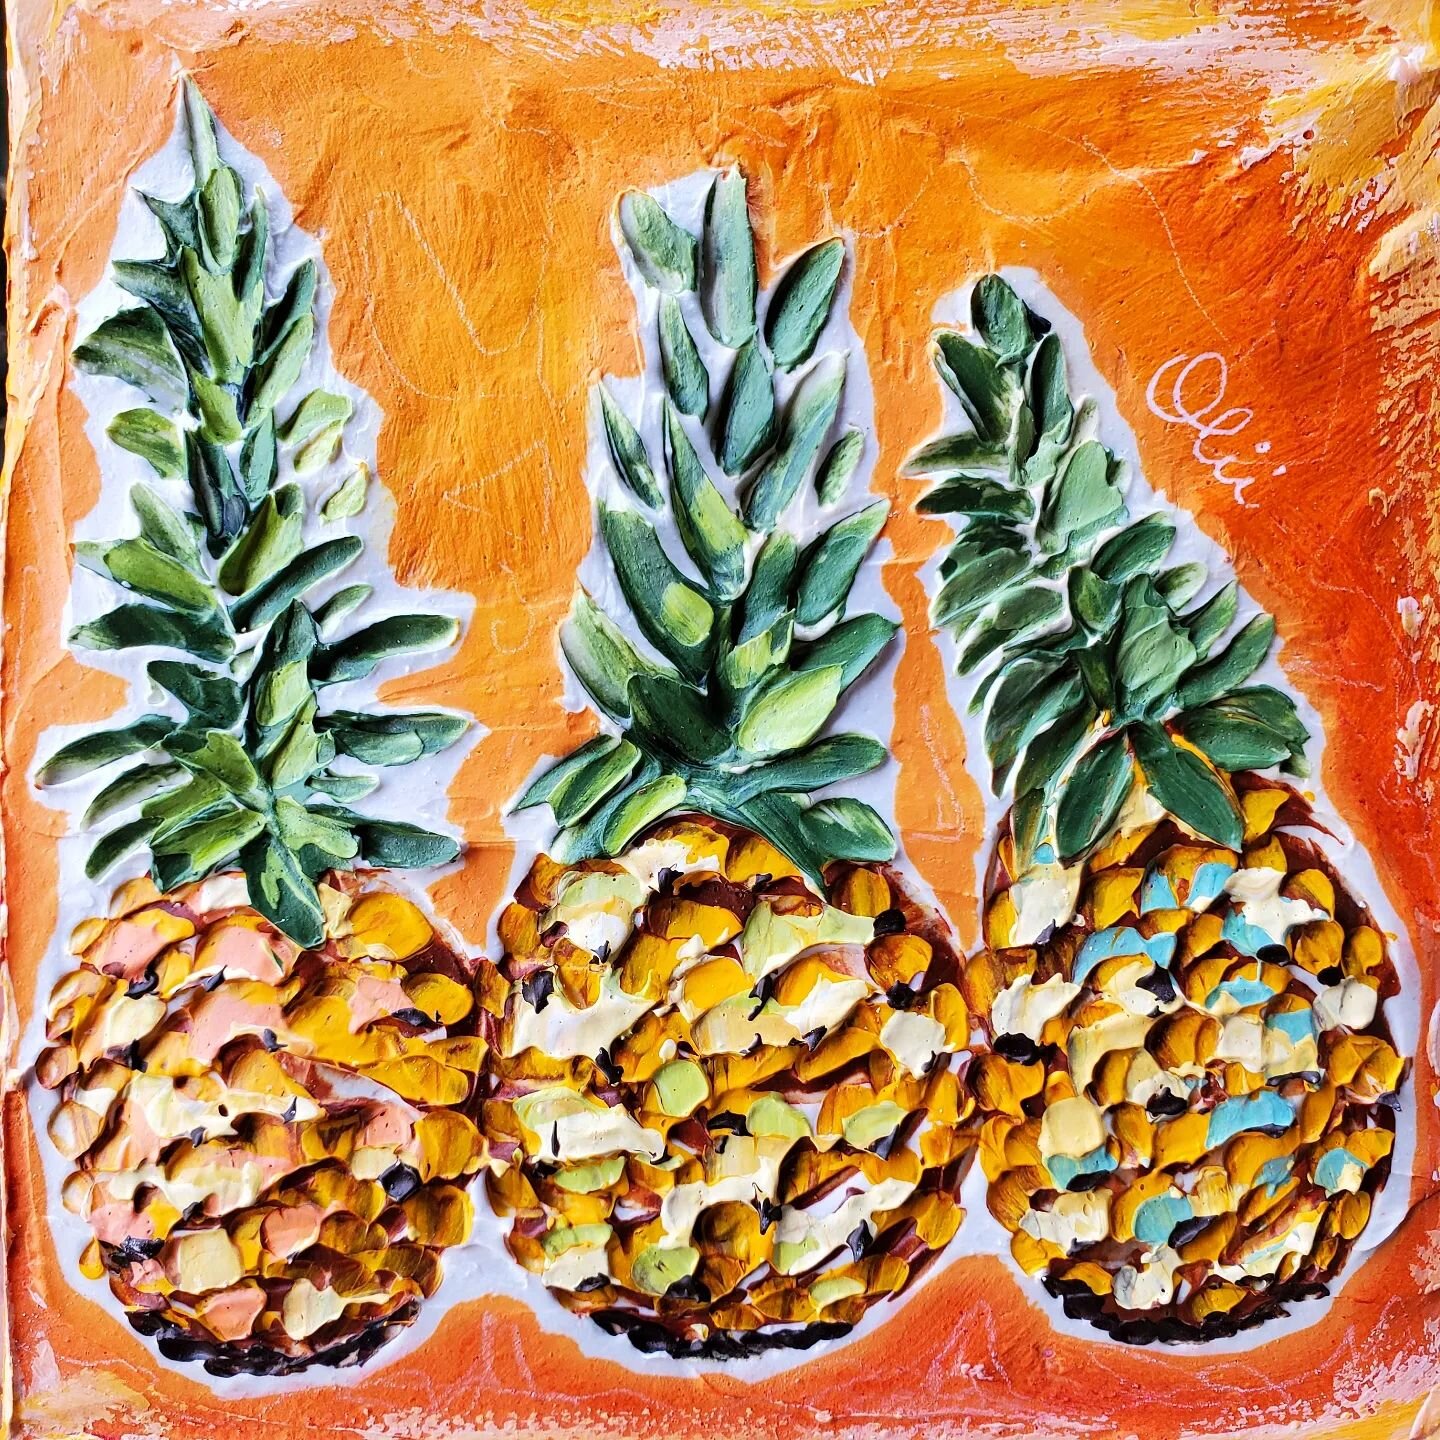 Other JUICY works from this week 🌞

Slide 1: &quot;Juicy Golden Fineapples&quot; a Trio of Juicy Goodness. 🍍🍍🍍

Slide 2: Florida Fineapple-🍍 the single ready to mingle baddie of the bunch. Lol also an example of the single pineapple in yellow in